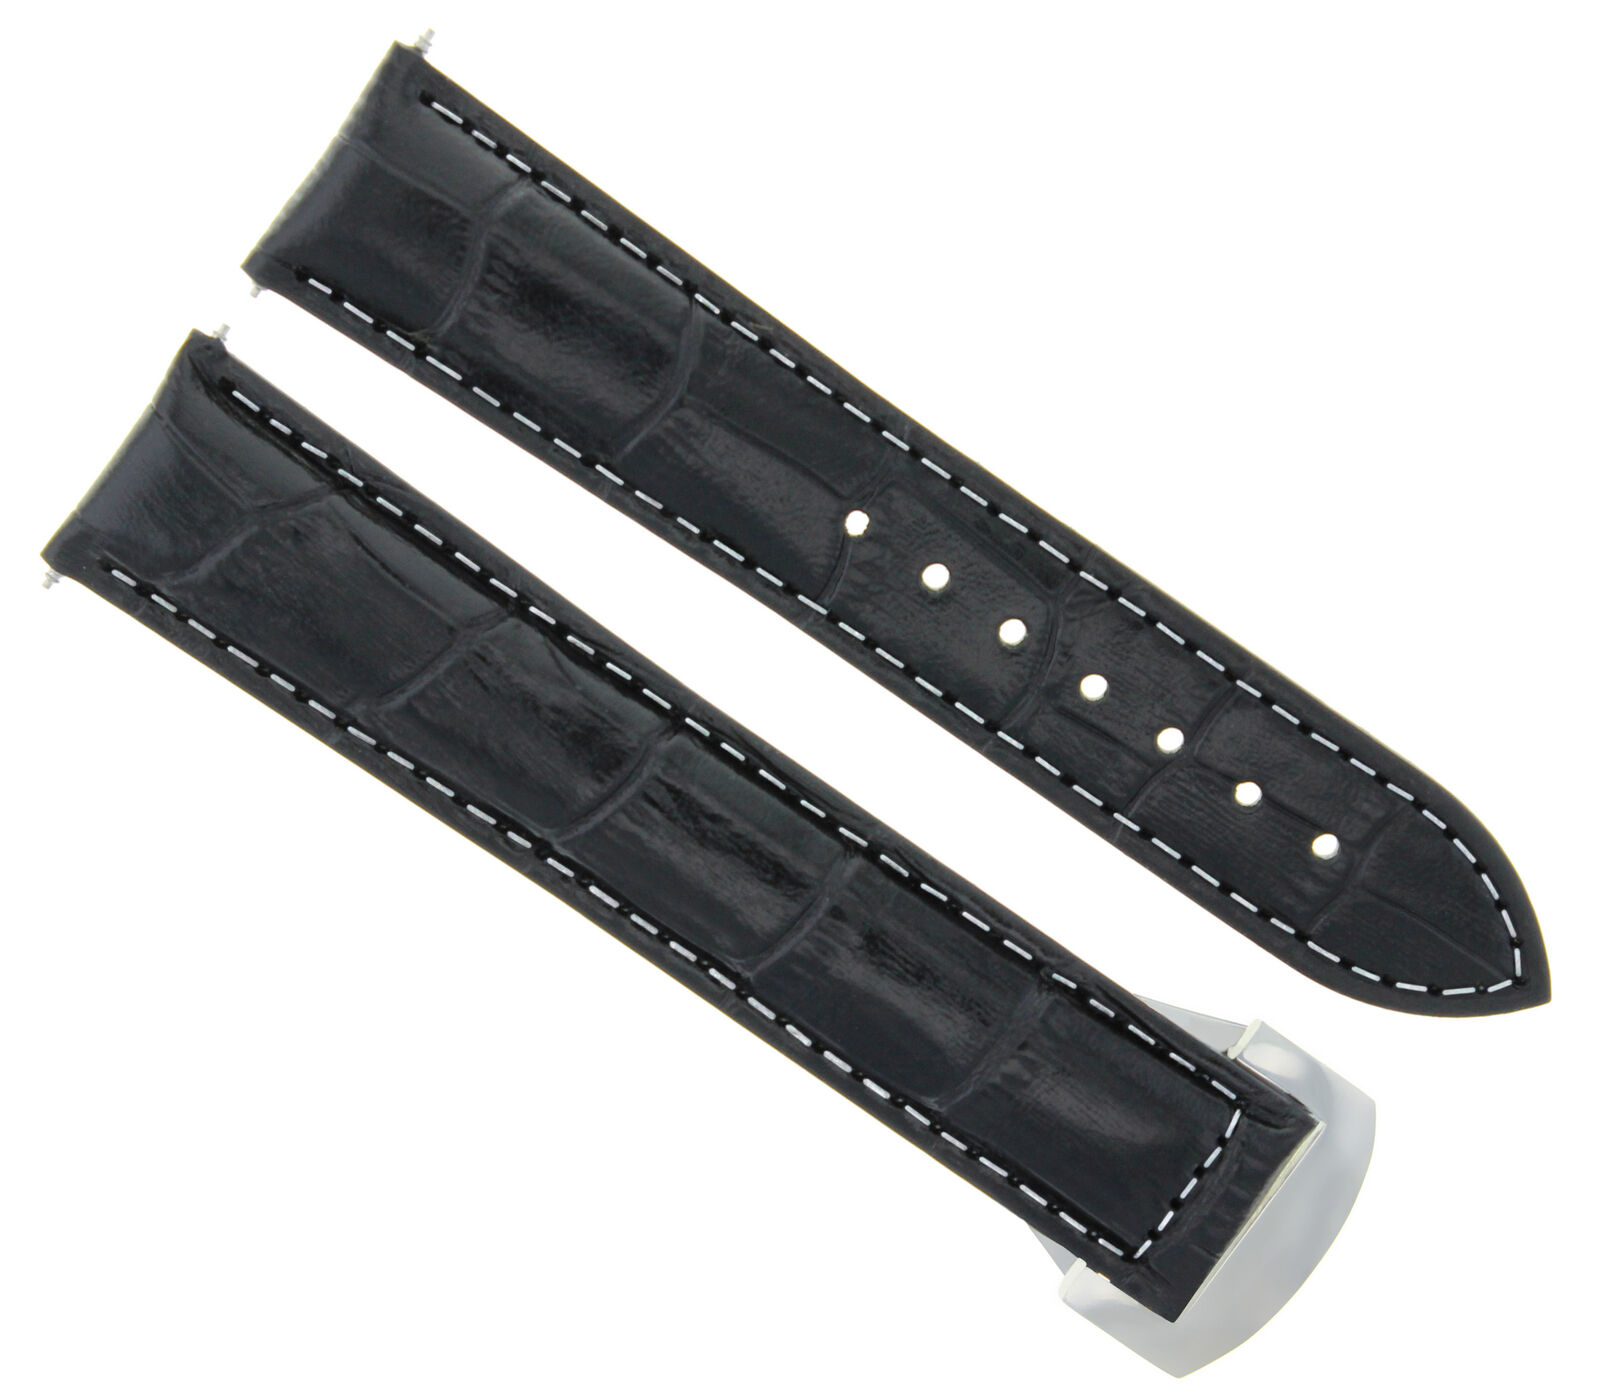 20MM LEATHER WATCH BAND STRAP FOR 41MM OMEGA SEAMASTER PLANET + CLASP BLACK WS